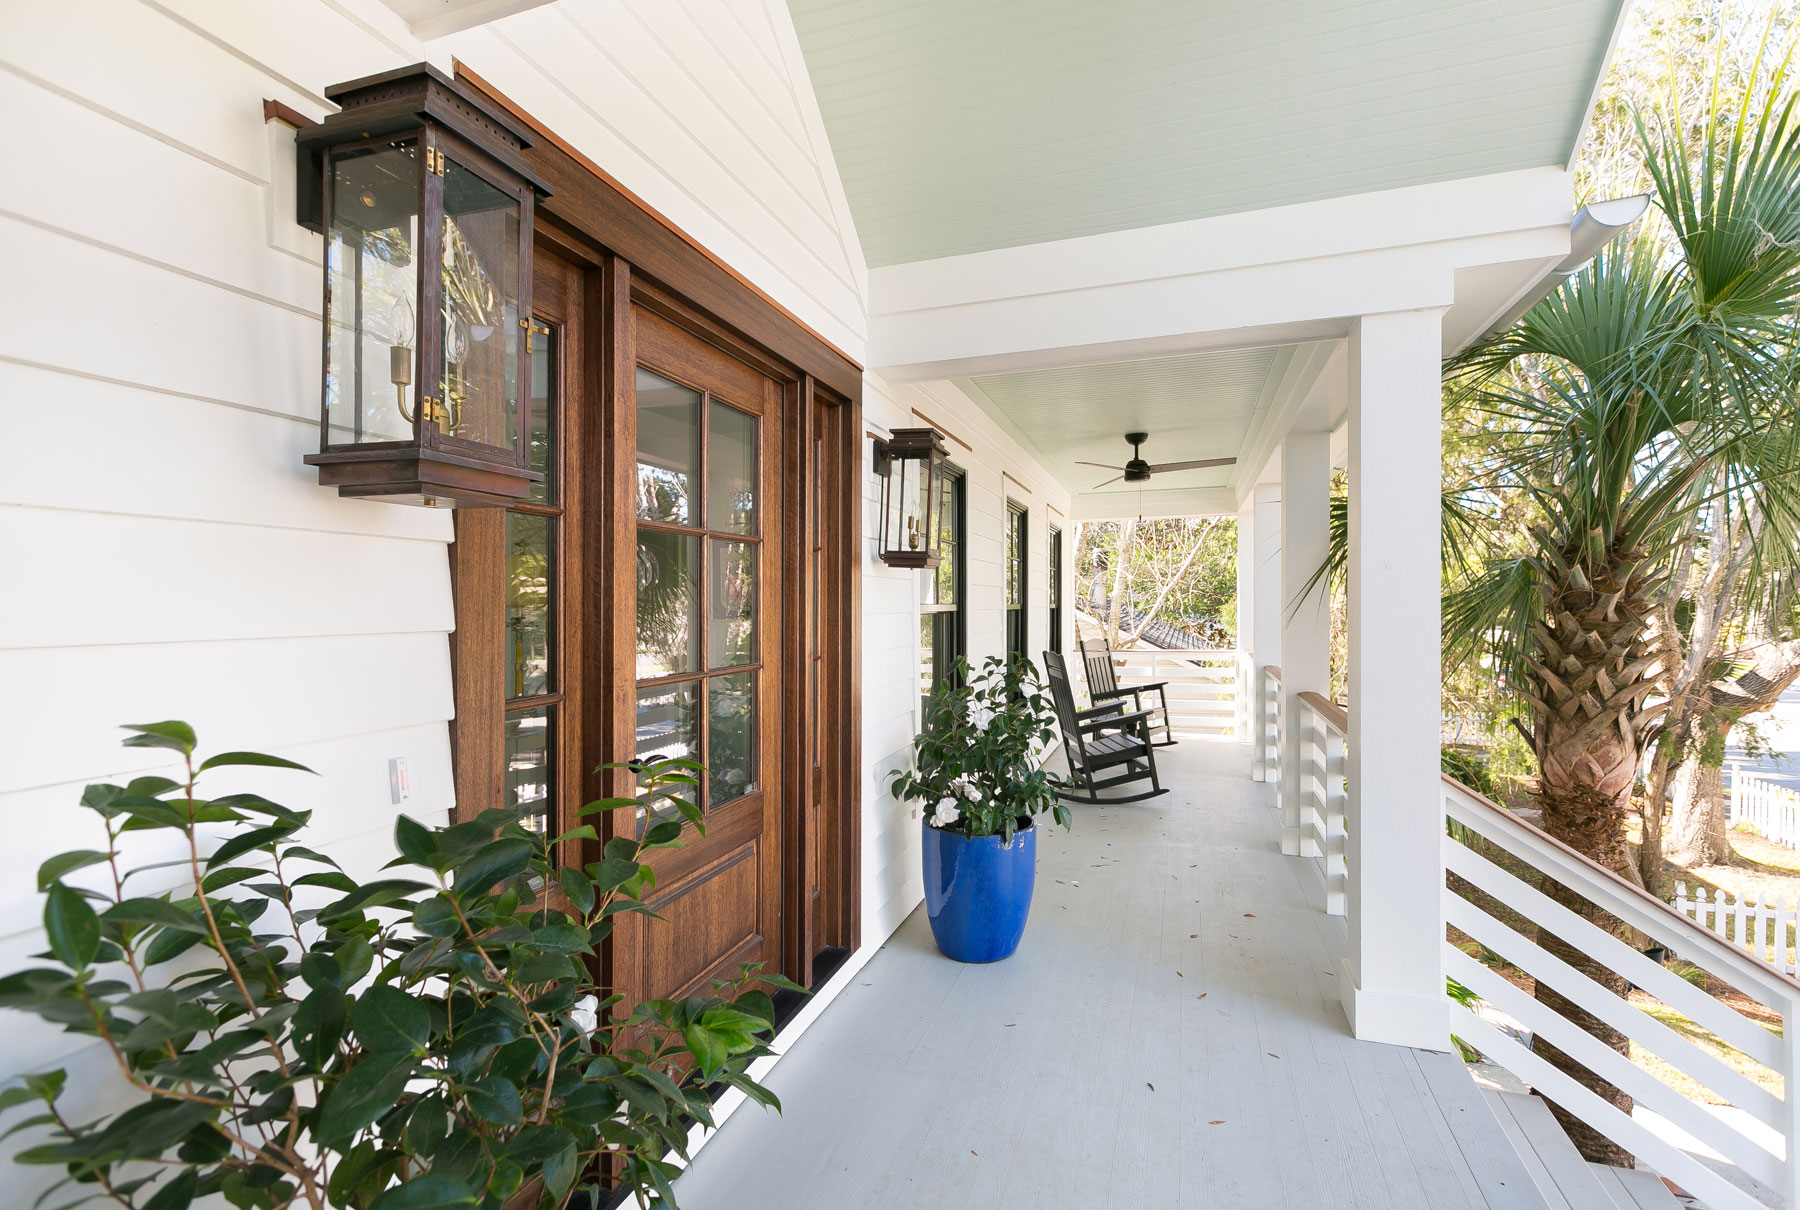 Home renovation and front porch remodel into coastal style